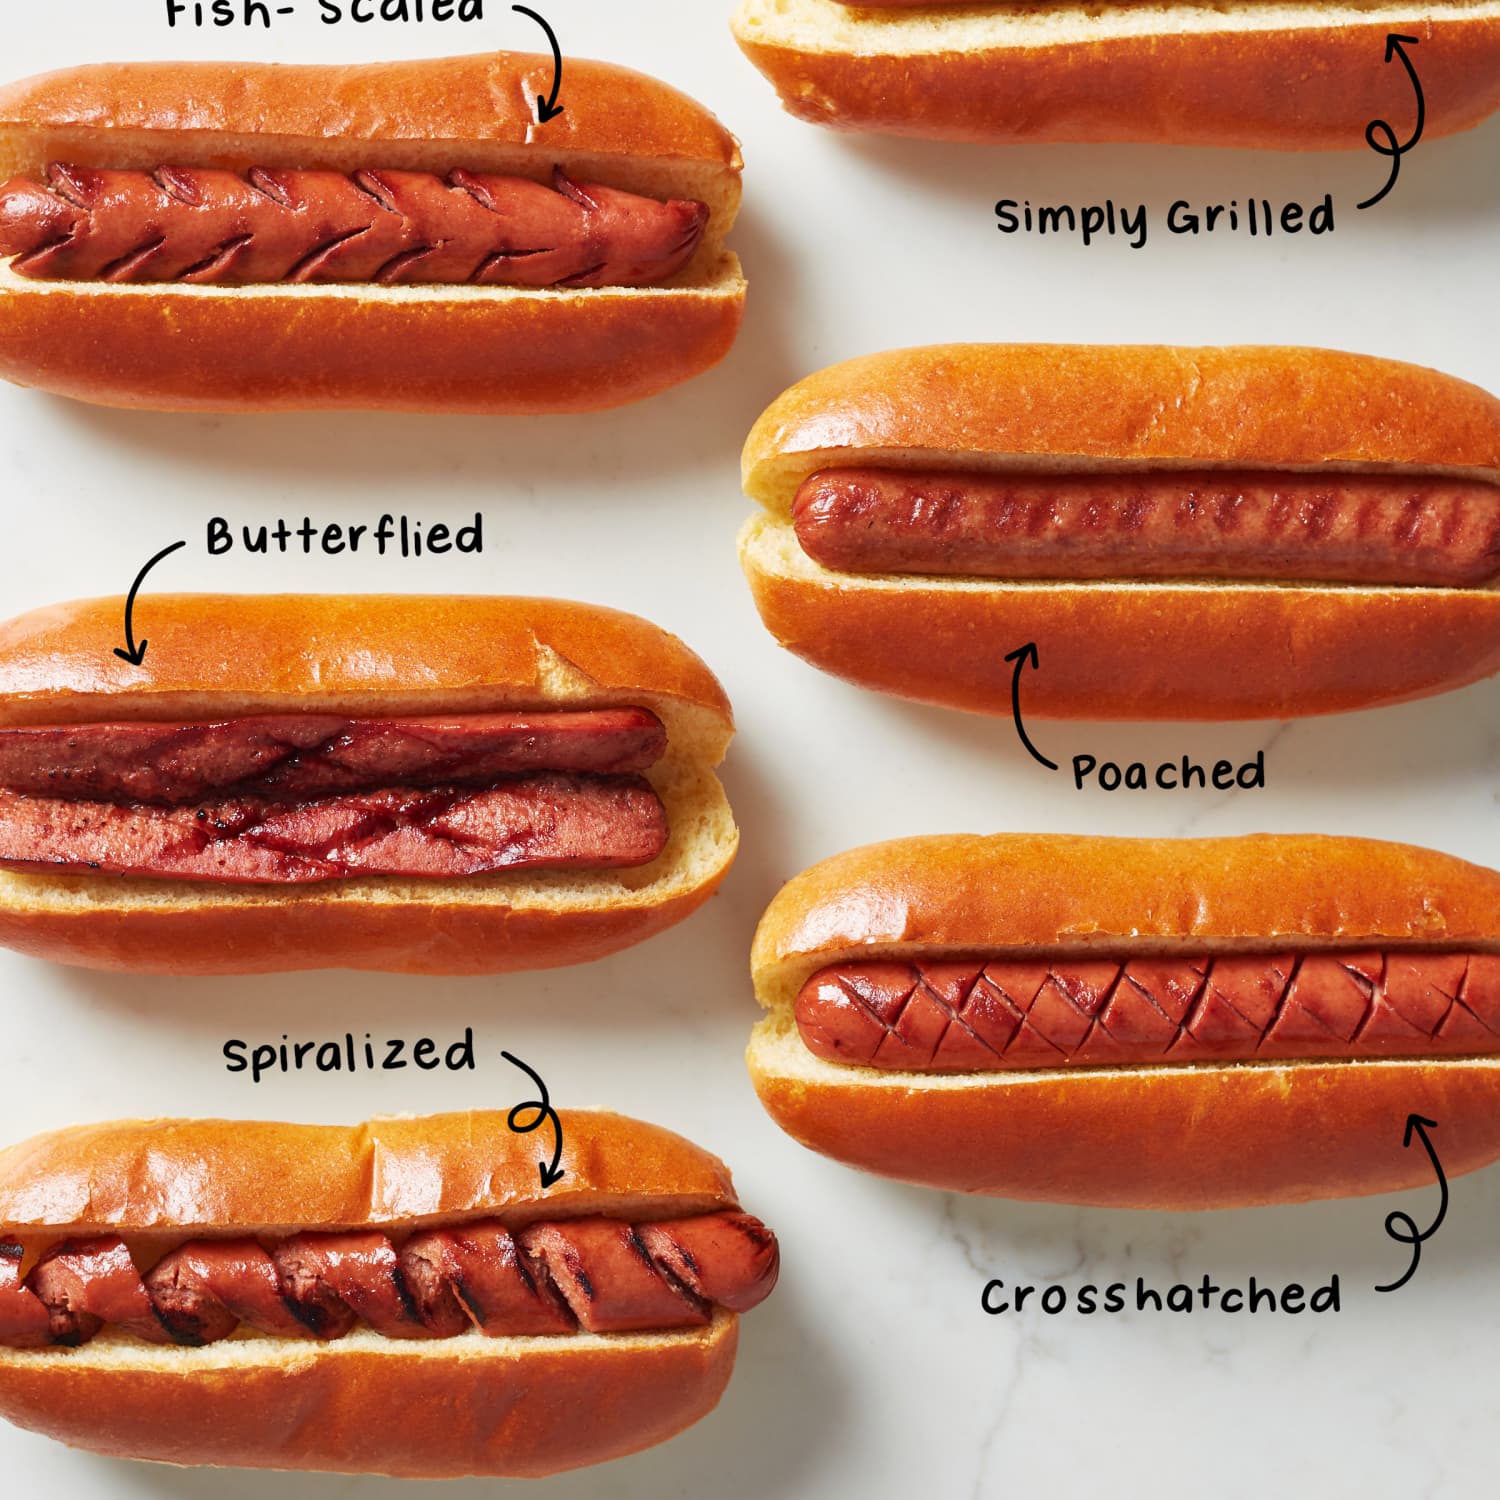 Gourmet Hot Dog Recipes for Mediterranean Inspired Hot Dogs